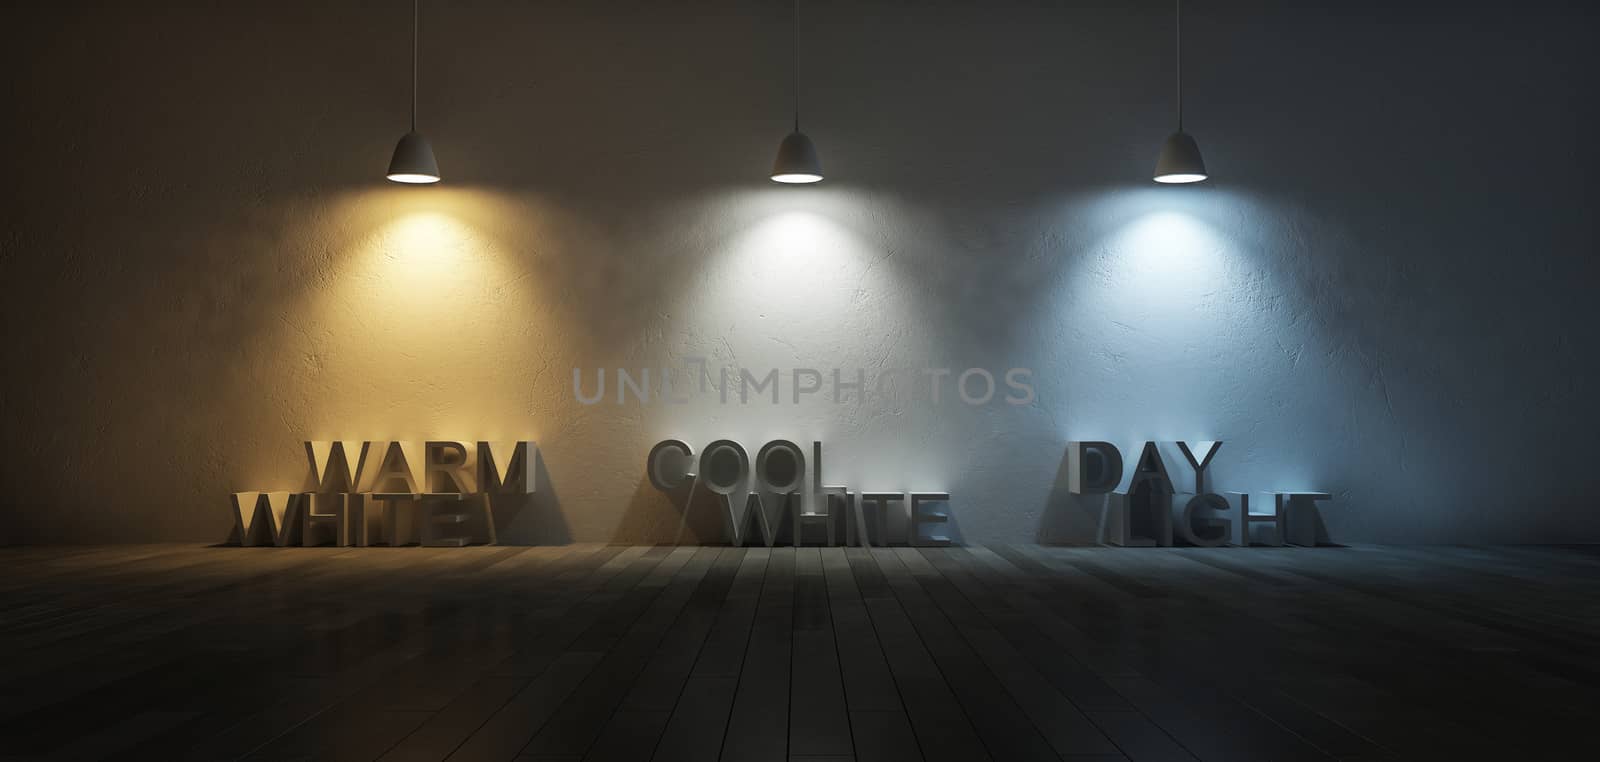 3Ds rendered image of 3 hanging lamps which use different bulbs. Color temperature scale. Cool white,warm white, day light. 3 colors of light on the cracked concrete wall and wooden floor